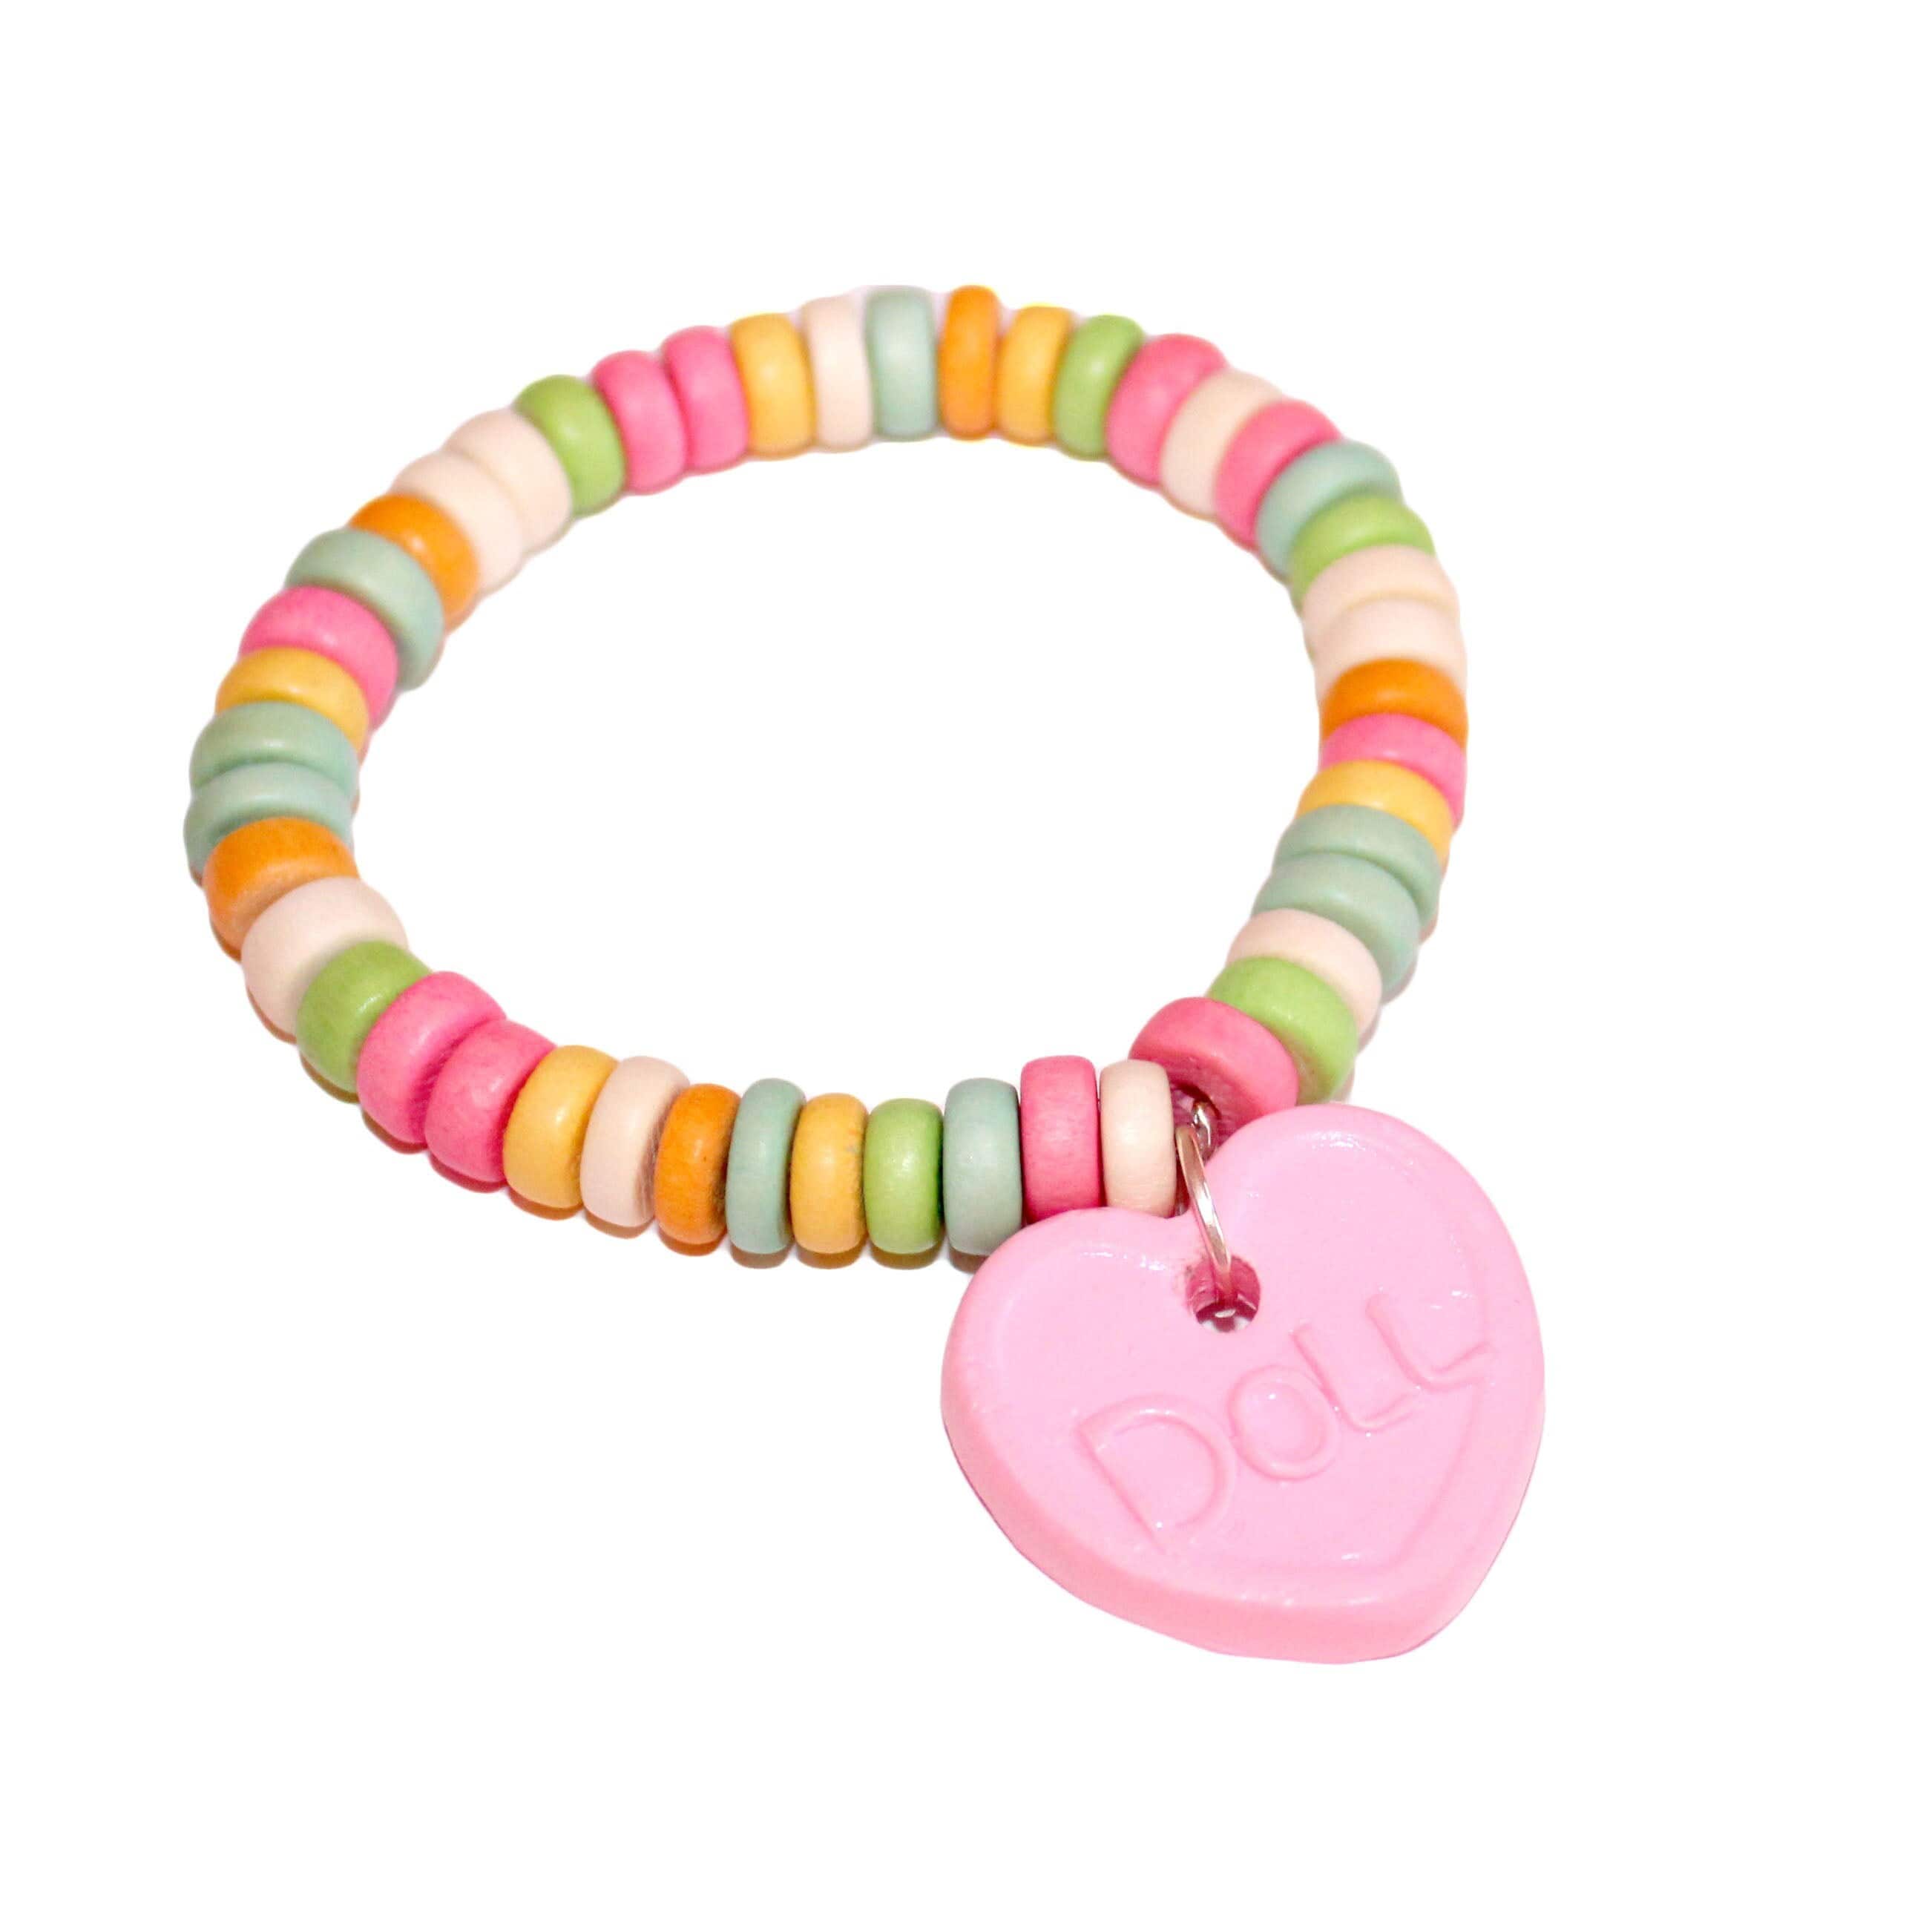 LOVE BEADS CANDY BRACELET, Packaged Candy